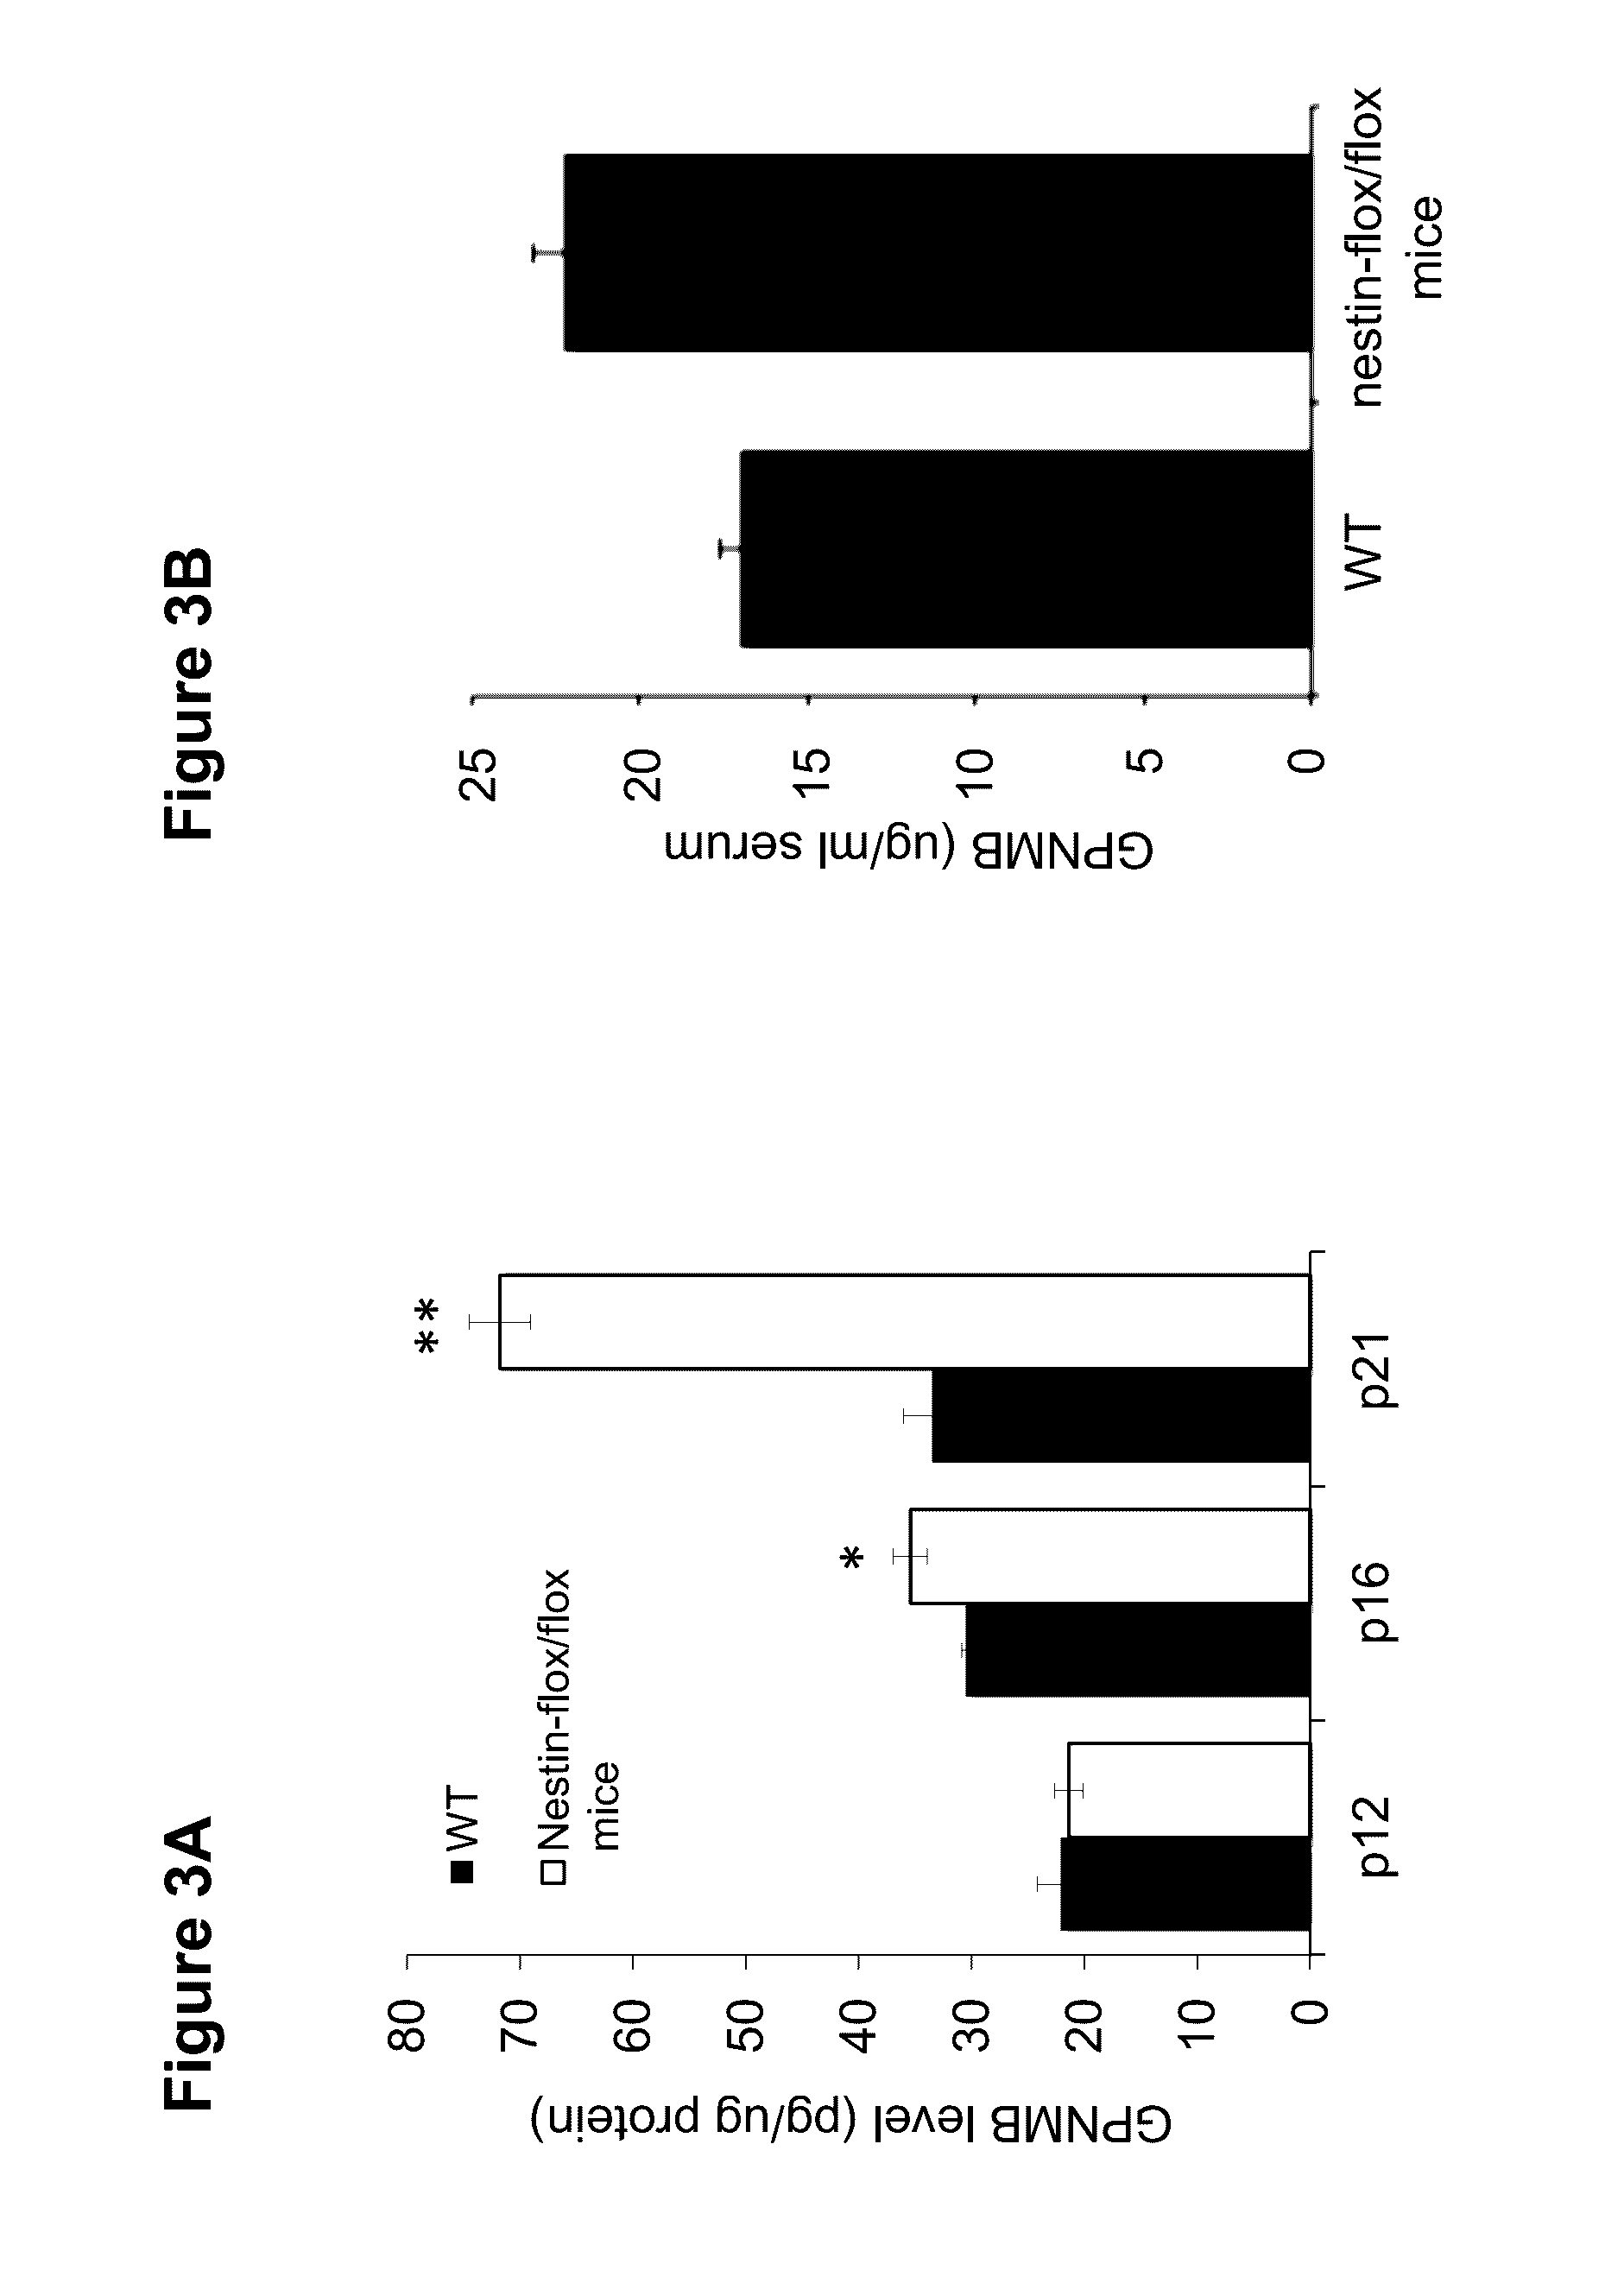 Marker of neuropathic gaucher's disease and methods of use thereof